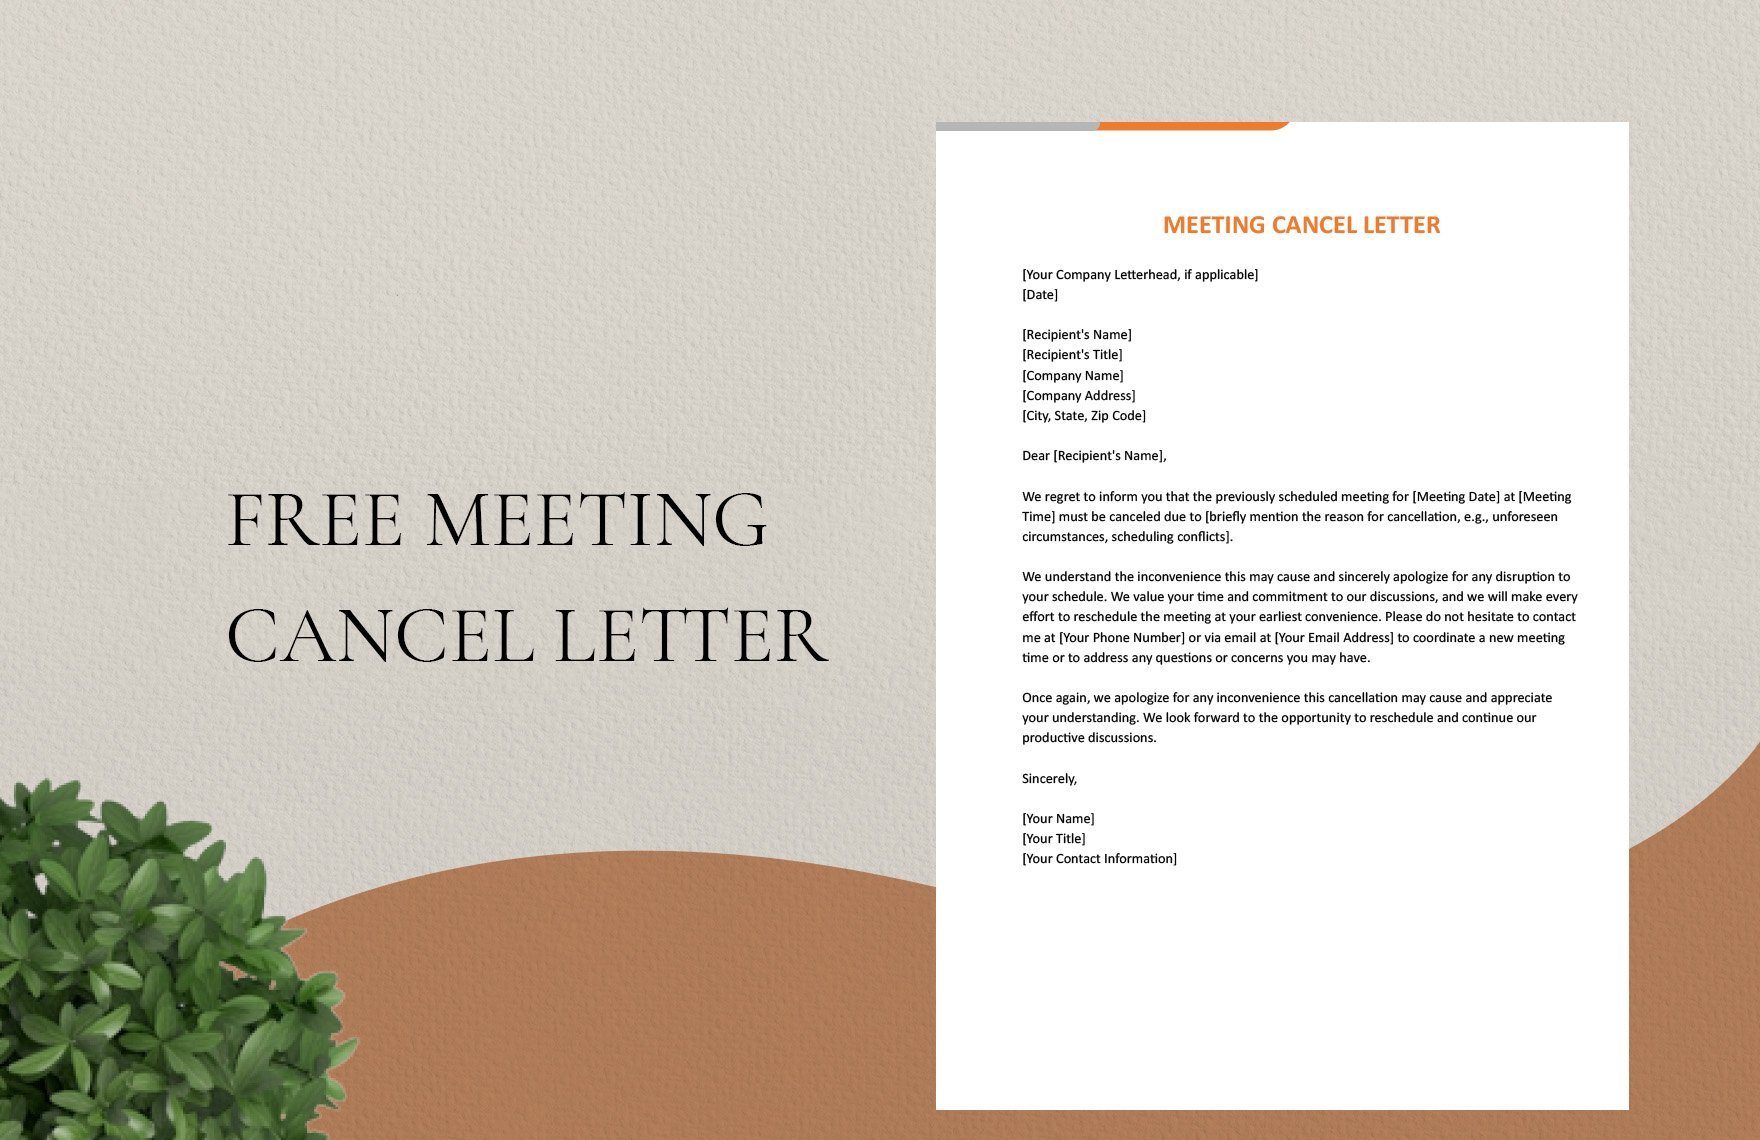 Free Meeting Cancel Letter in Word, Google Docs